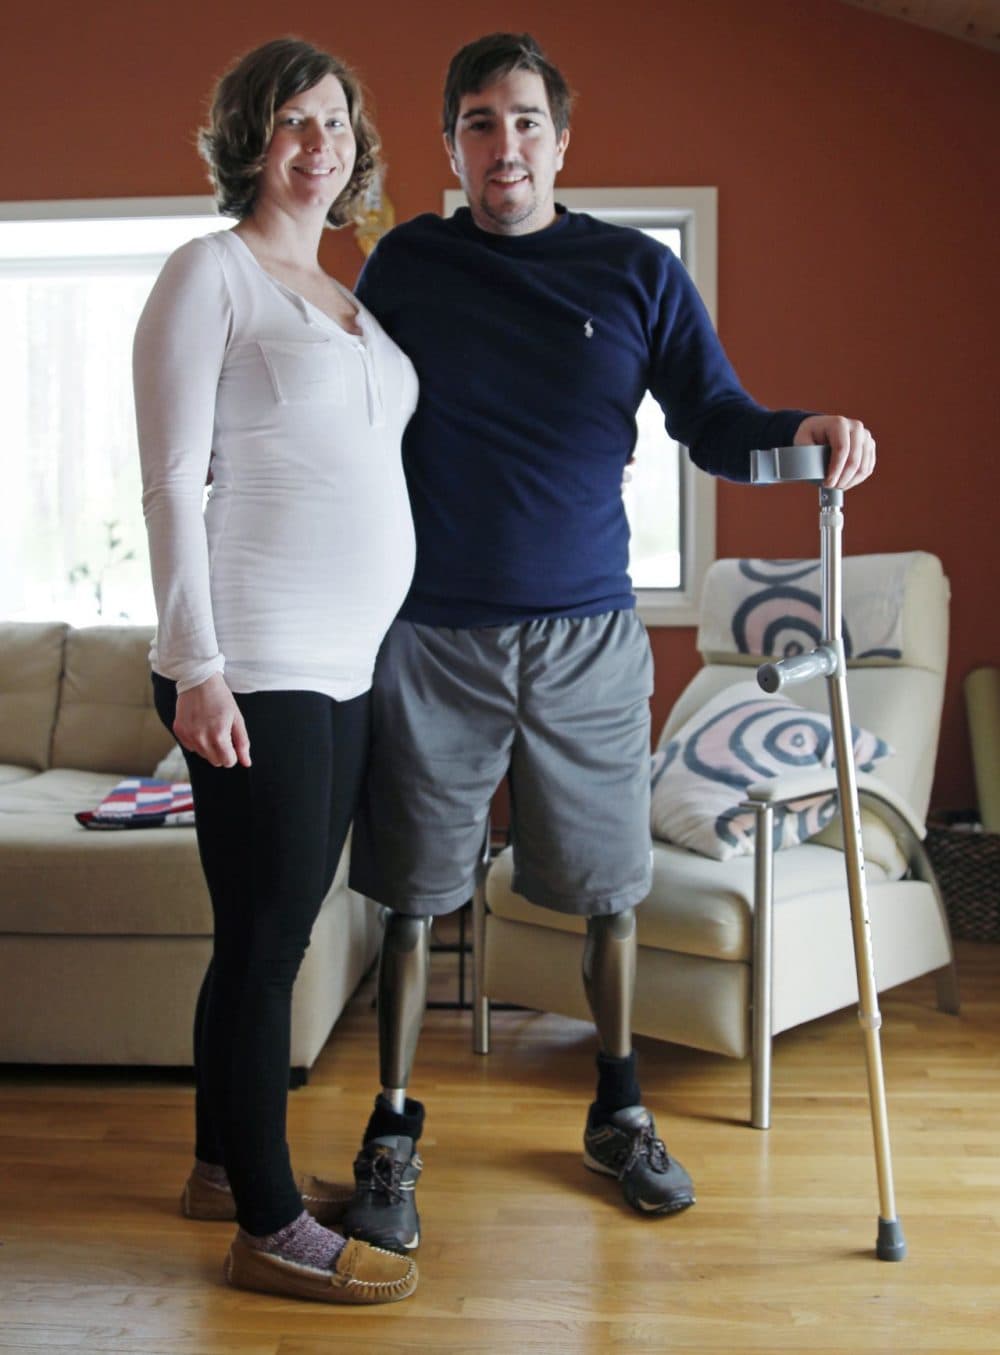 Jeff Bauman, who lost both legs in the Boston Marathon bombings, then helped authorities identify the suspects, poses with his expectant fiancé, Erin Hurley, their home in Carlisle, Mass., Friday, March 14, 2014. According to Bauman, the baby is due July 14. They don’t know if it’s a boy or a girl, and they want it to be a surprise. The two were engaged in February. (Charles Krupa/AP)